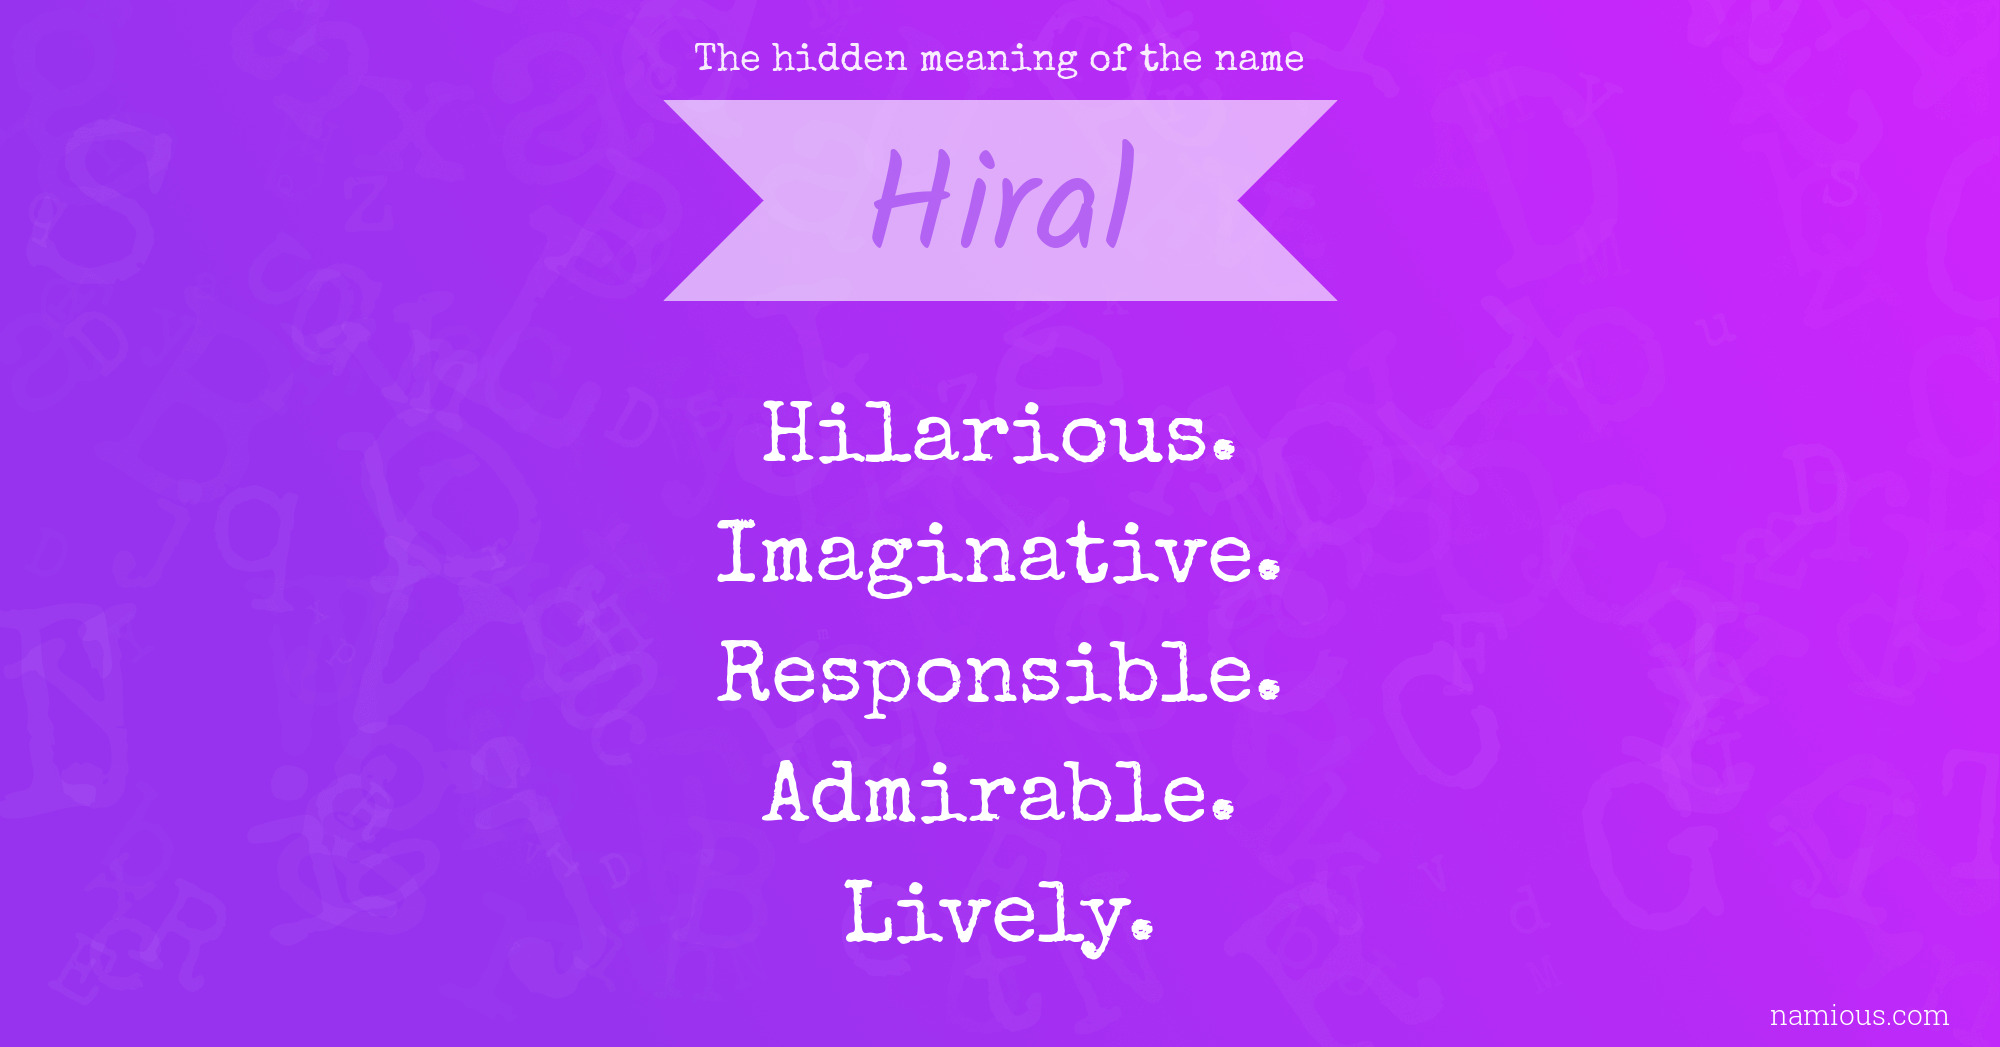 The hidden meaning of the name Hiral